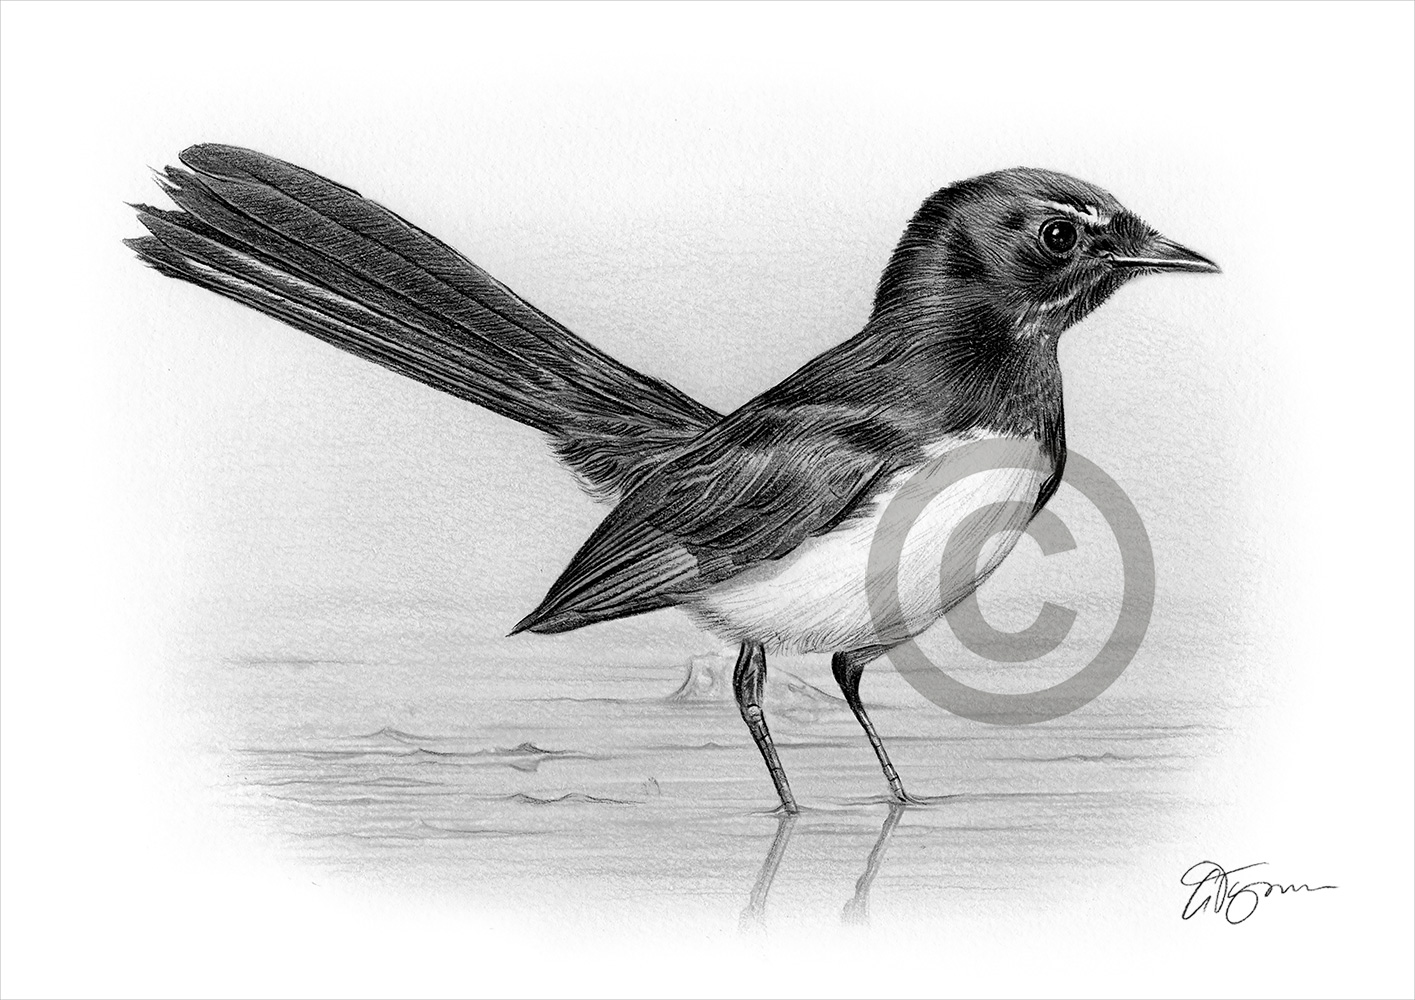 Pencil drawing commission of a small bird by artist Gary Tymon